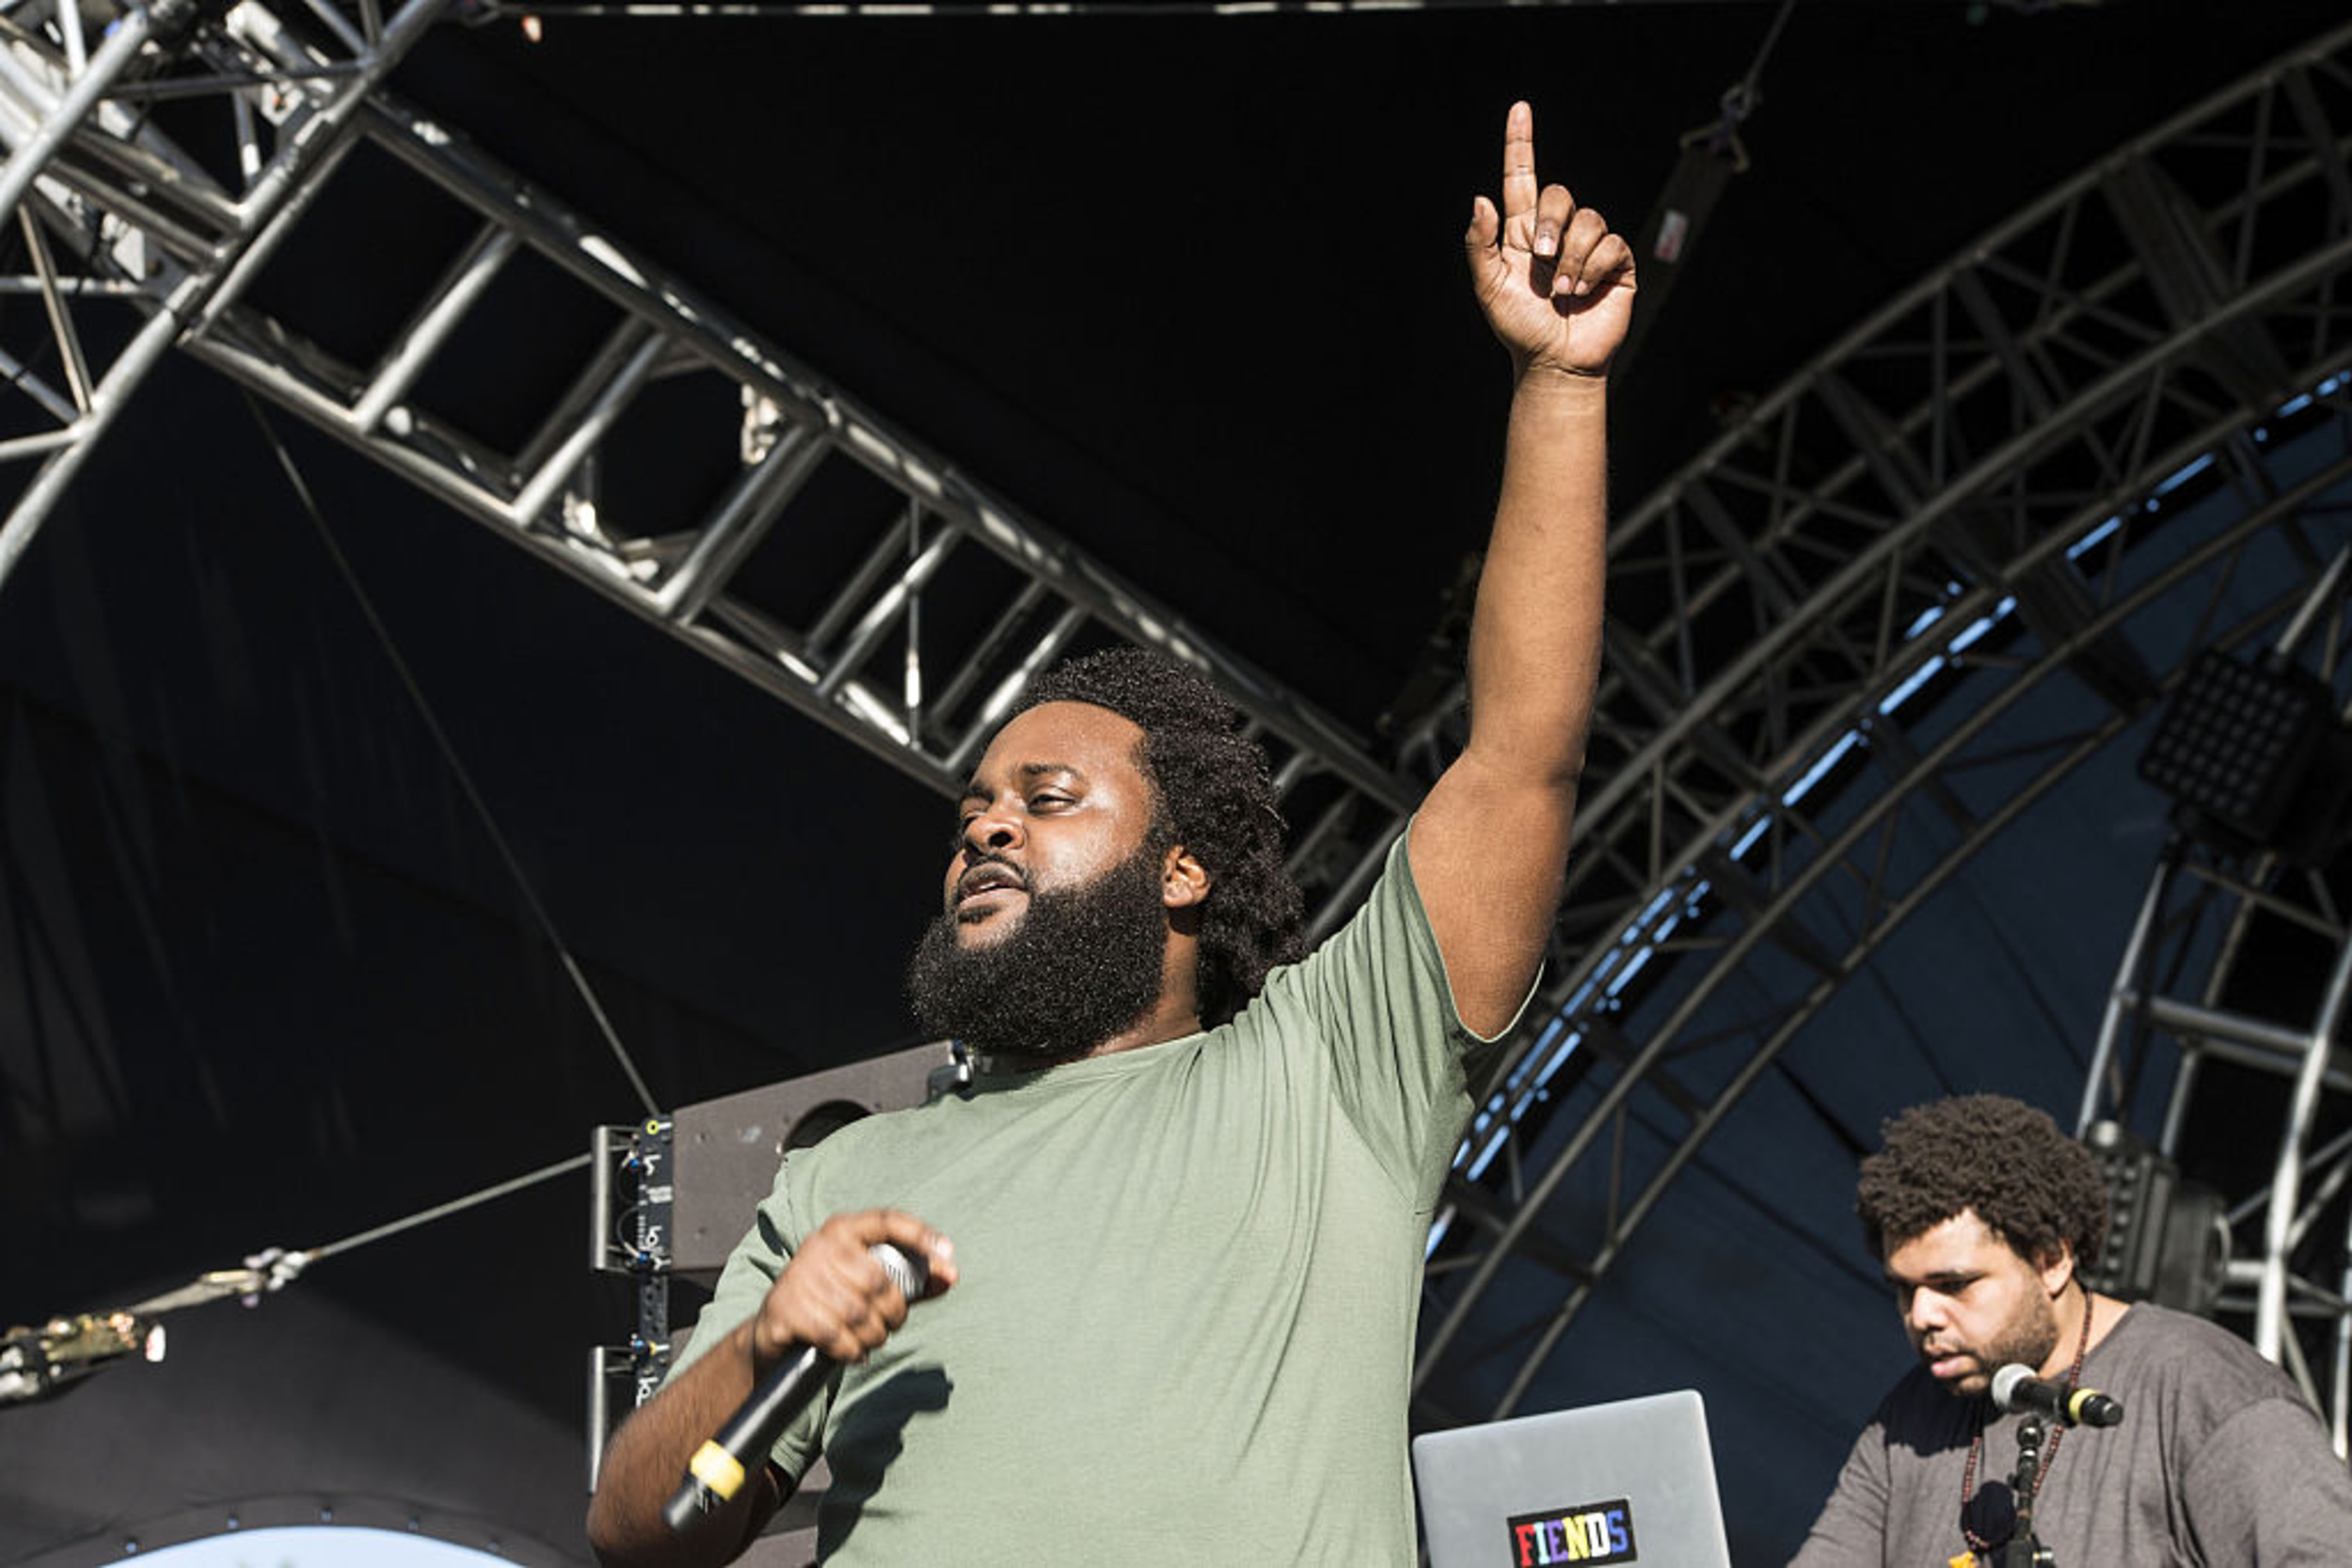 <p>In December 2023, Dreamville artist Bas released his long-awaited fourth album <em>We Only Talk About Real S—t  When We’re F—d  Up</em> which featured several collaborations alongside J. Cole, Amaarae, Adekunle Gold, and more. To help support the album, Bas is taking his music on the road with a 23-city North America tour. Bas will begin the tour on March 3rd in Dallas and wrap up on April 9th in New York. </p><p>You may also like: <a href='https://www.yardbarker.com/entertainment/articles/the_villains_from_90s_movies_who_we_love_to_hate_033124/s1__32965436'>The villains from '90s movies who we love to hate</a></p>